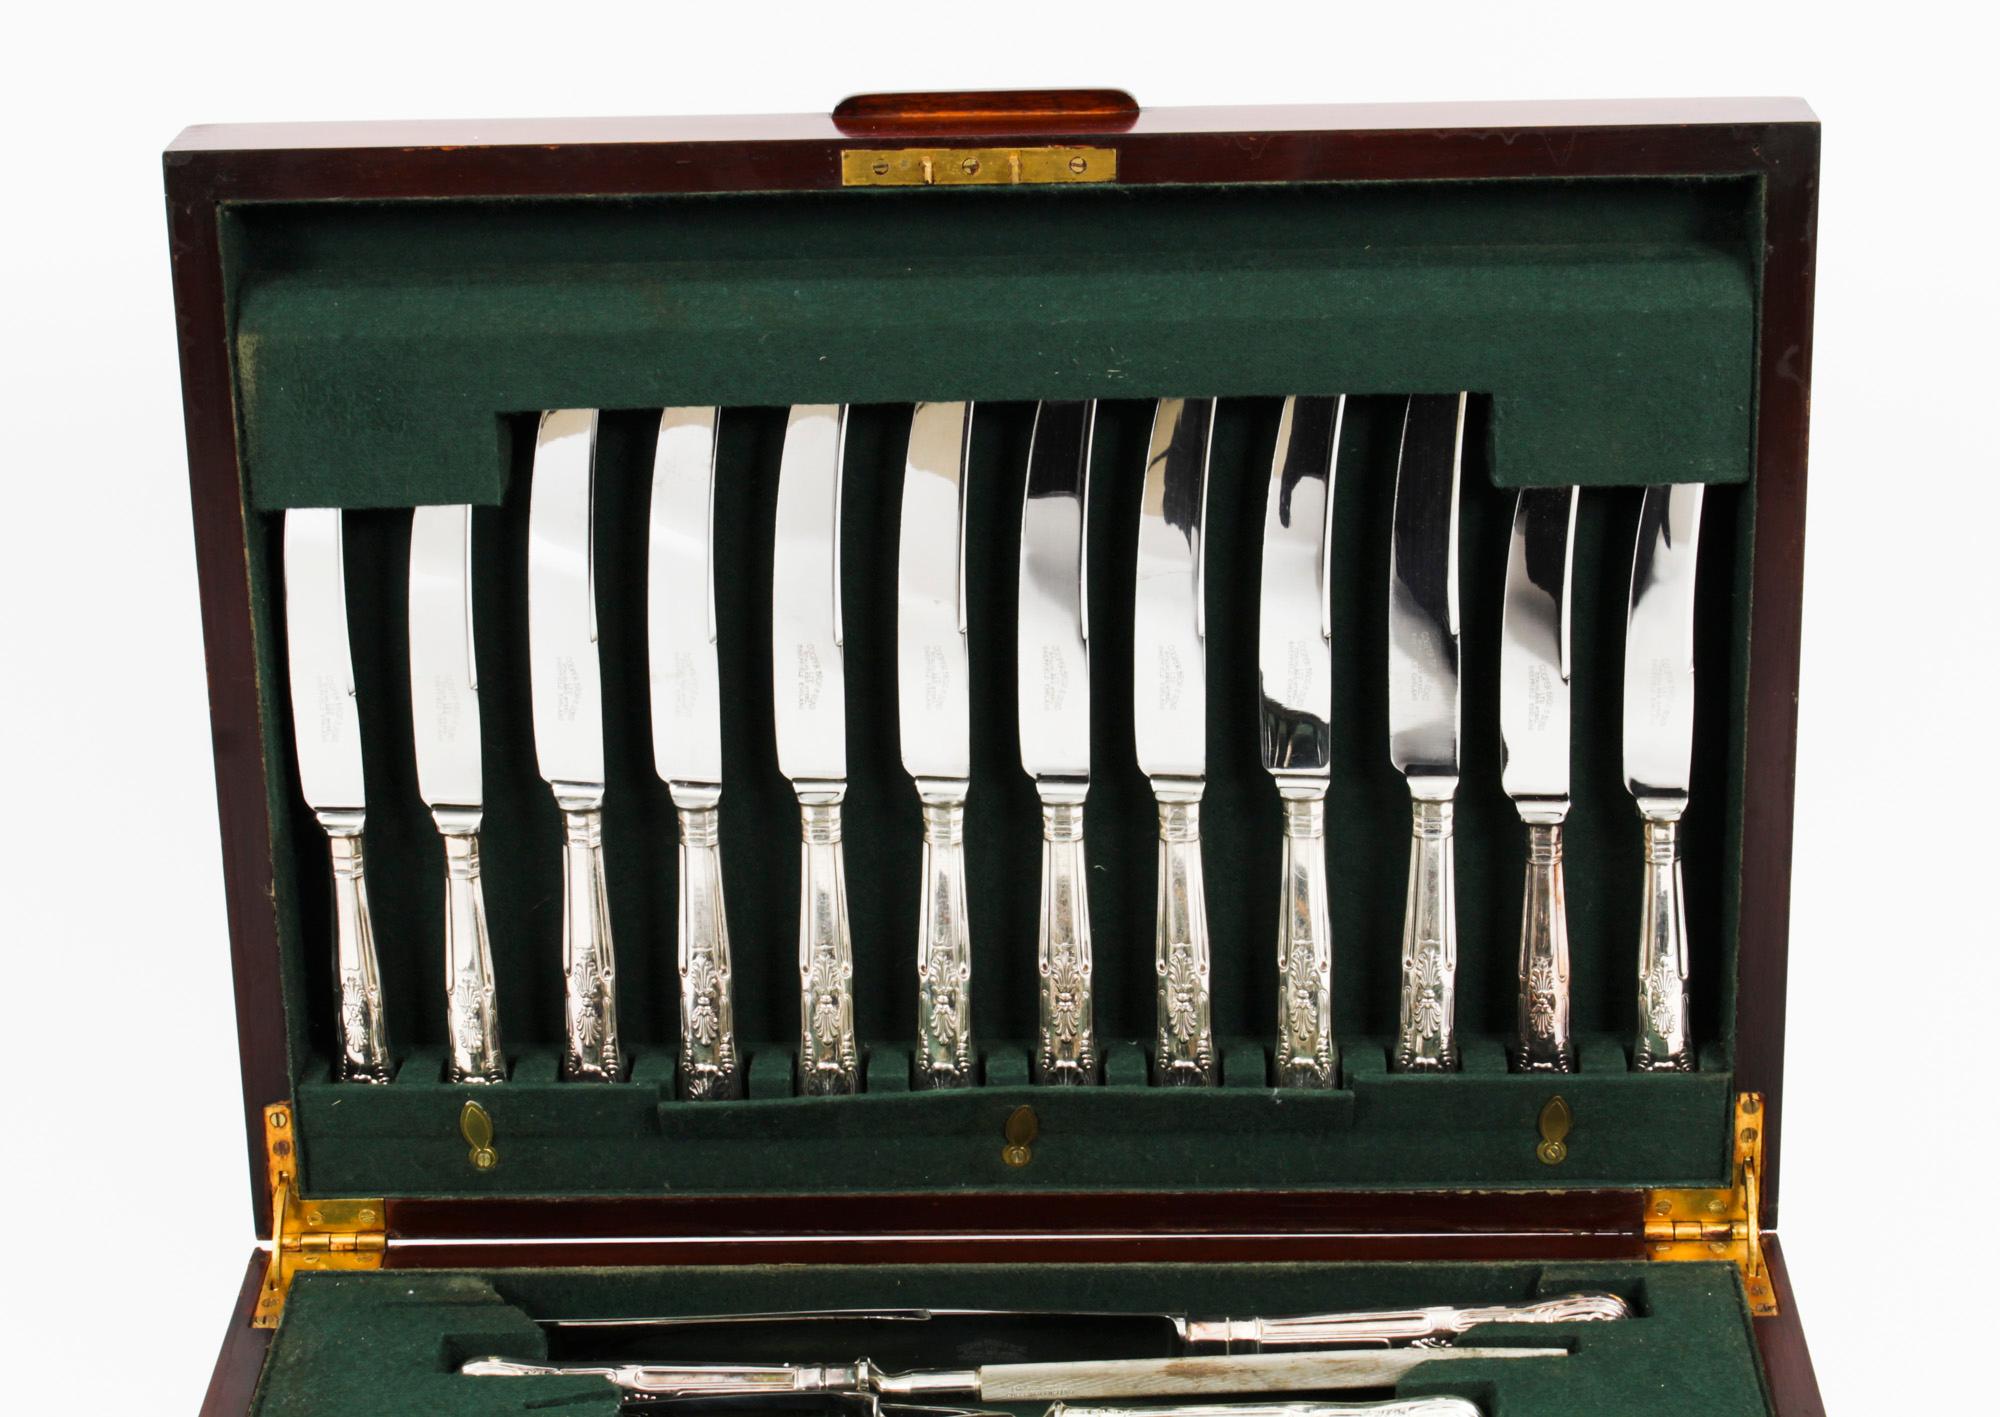 This is a beautiful antique English canteen, silver plated kings pattern cutlery set, by the renowned silversmith and retailer Cooper Bros & Sons, with eight place settings.

This stunning set is circa 1920 in date and includes its original